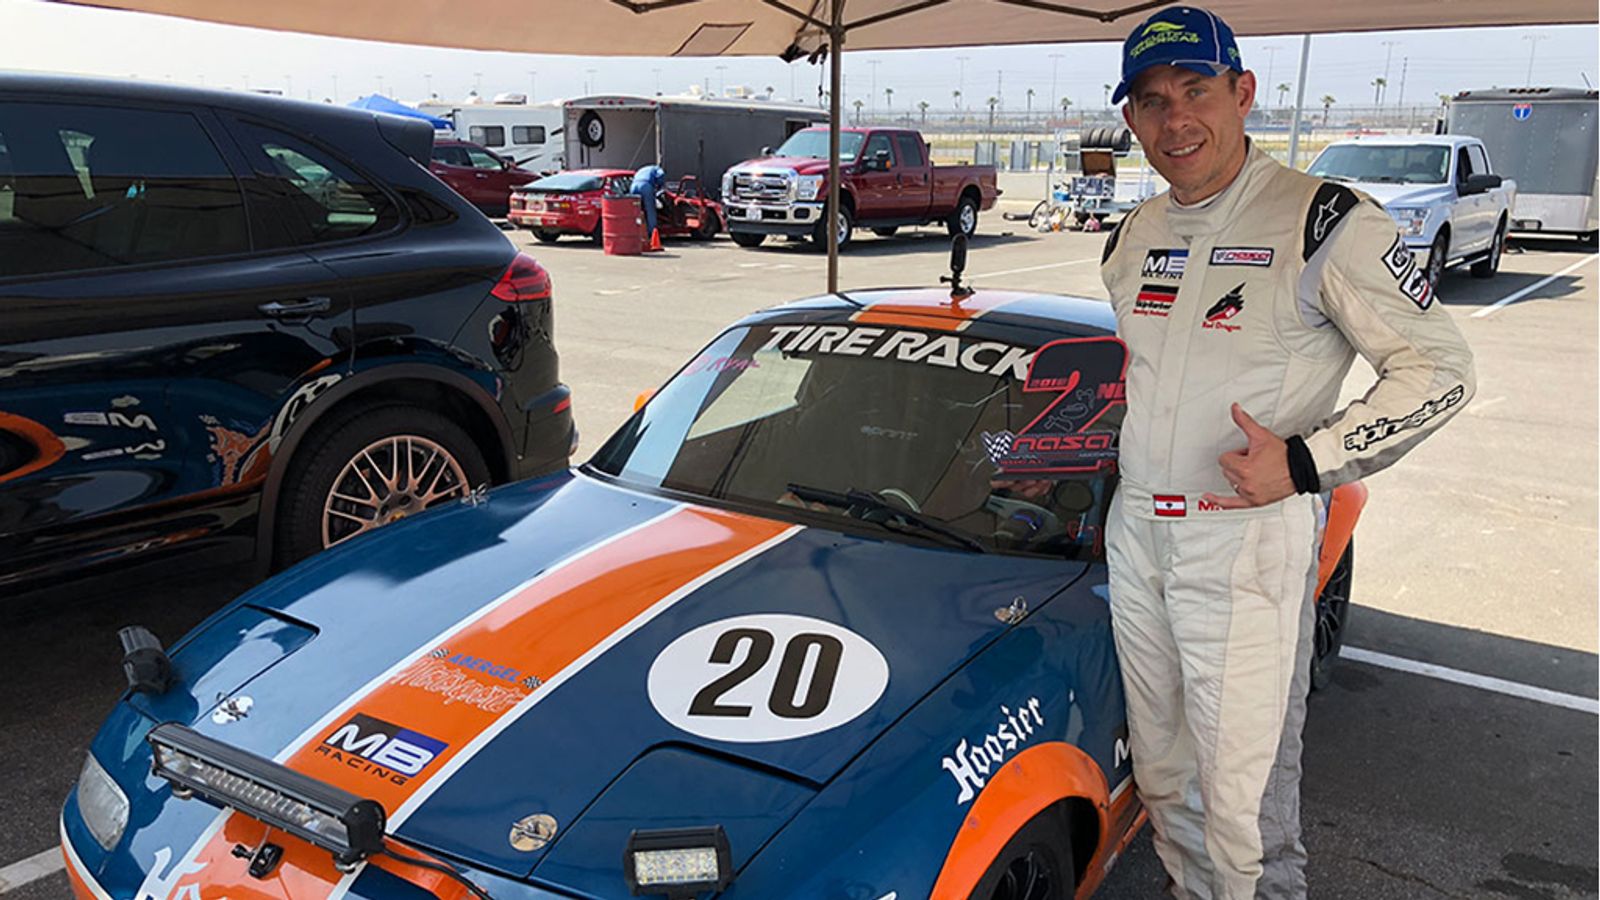 Mick Blue Takes 2nd Place in Major Car Race Roval Roundup